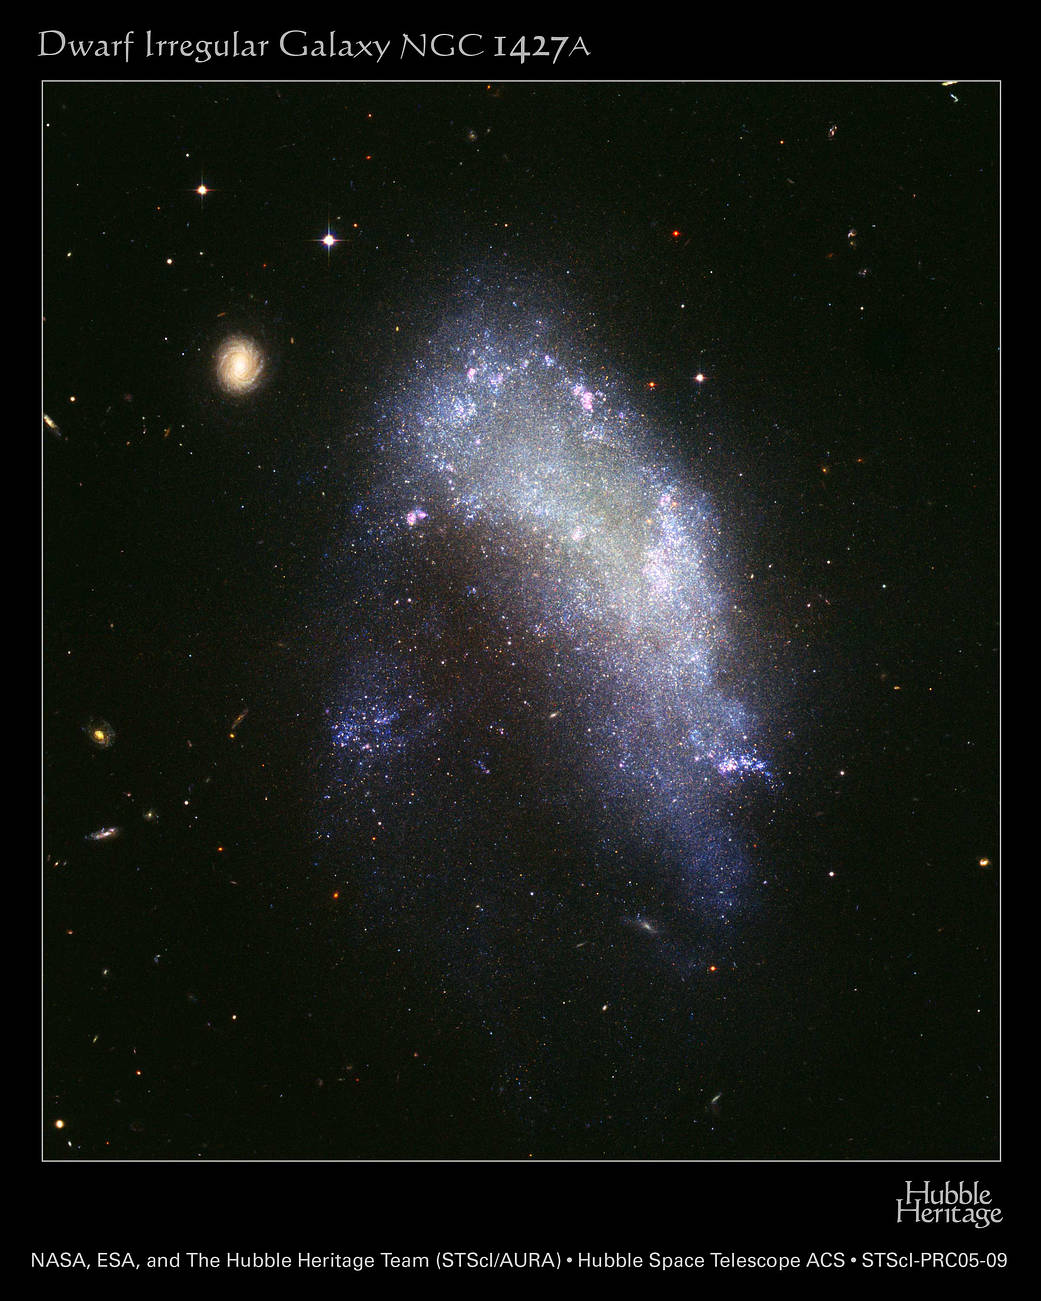 The Impending Destruction of NGC 1427A